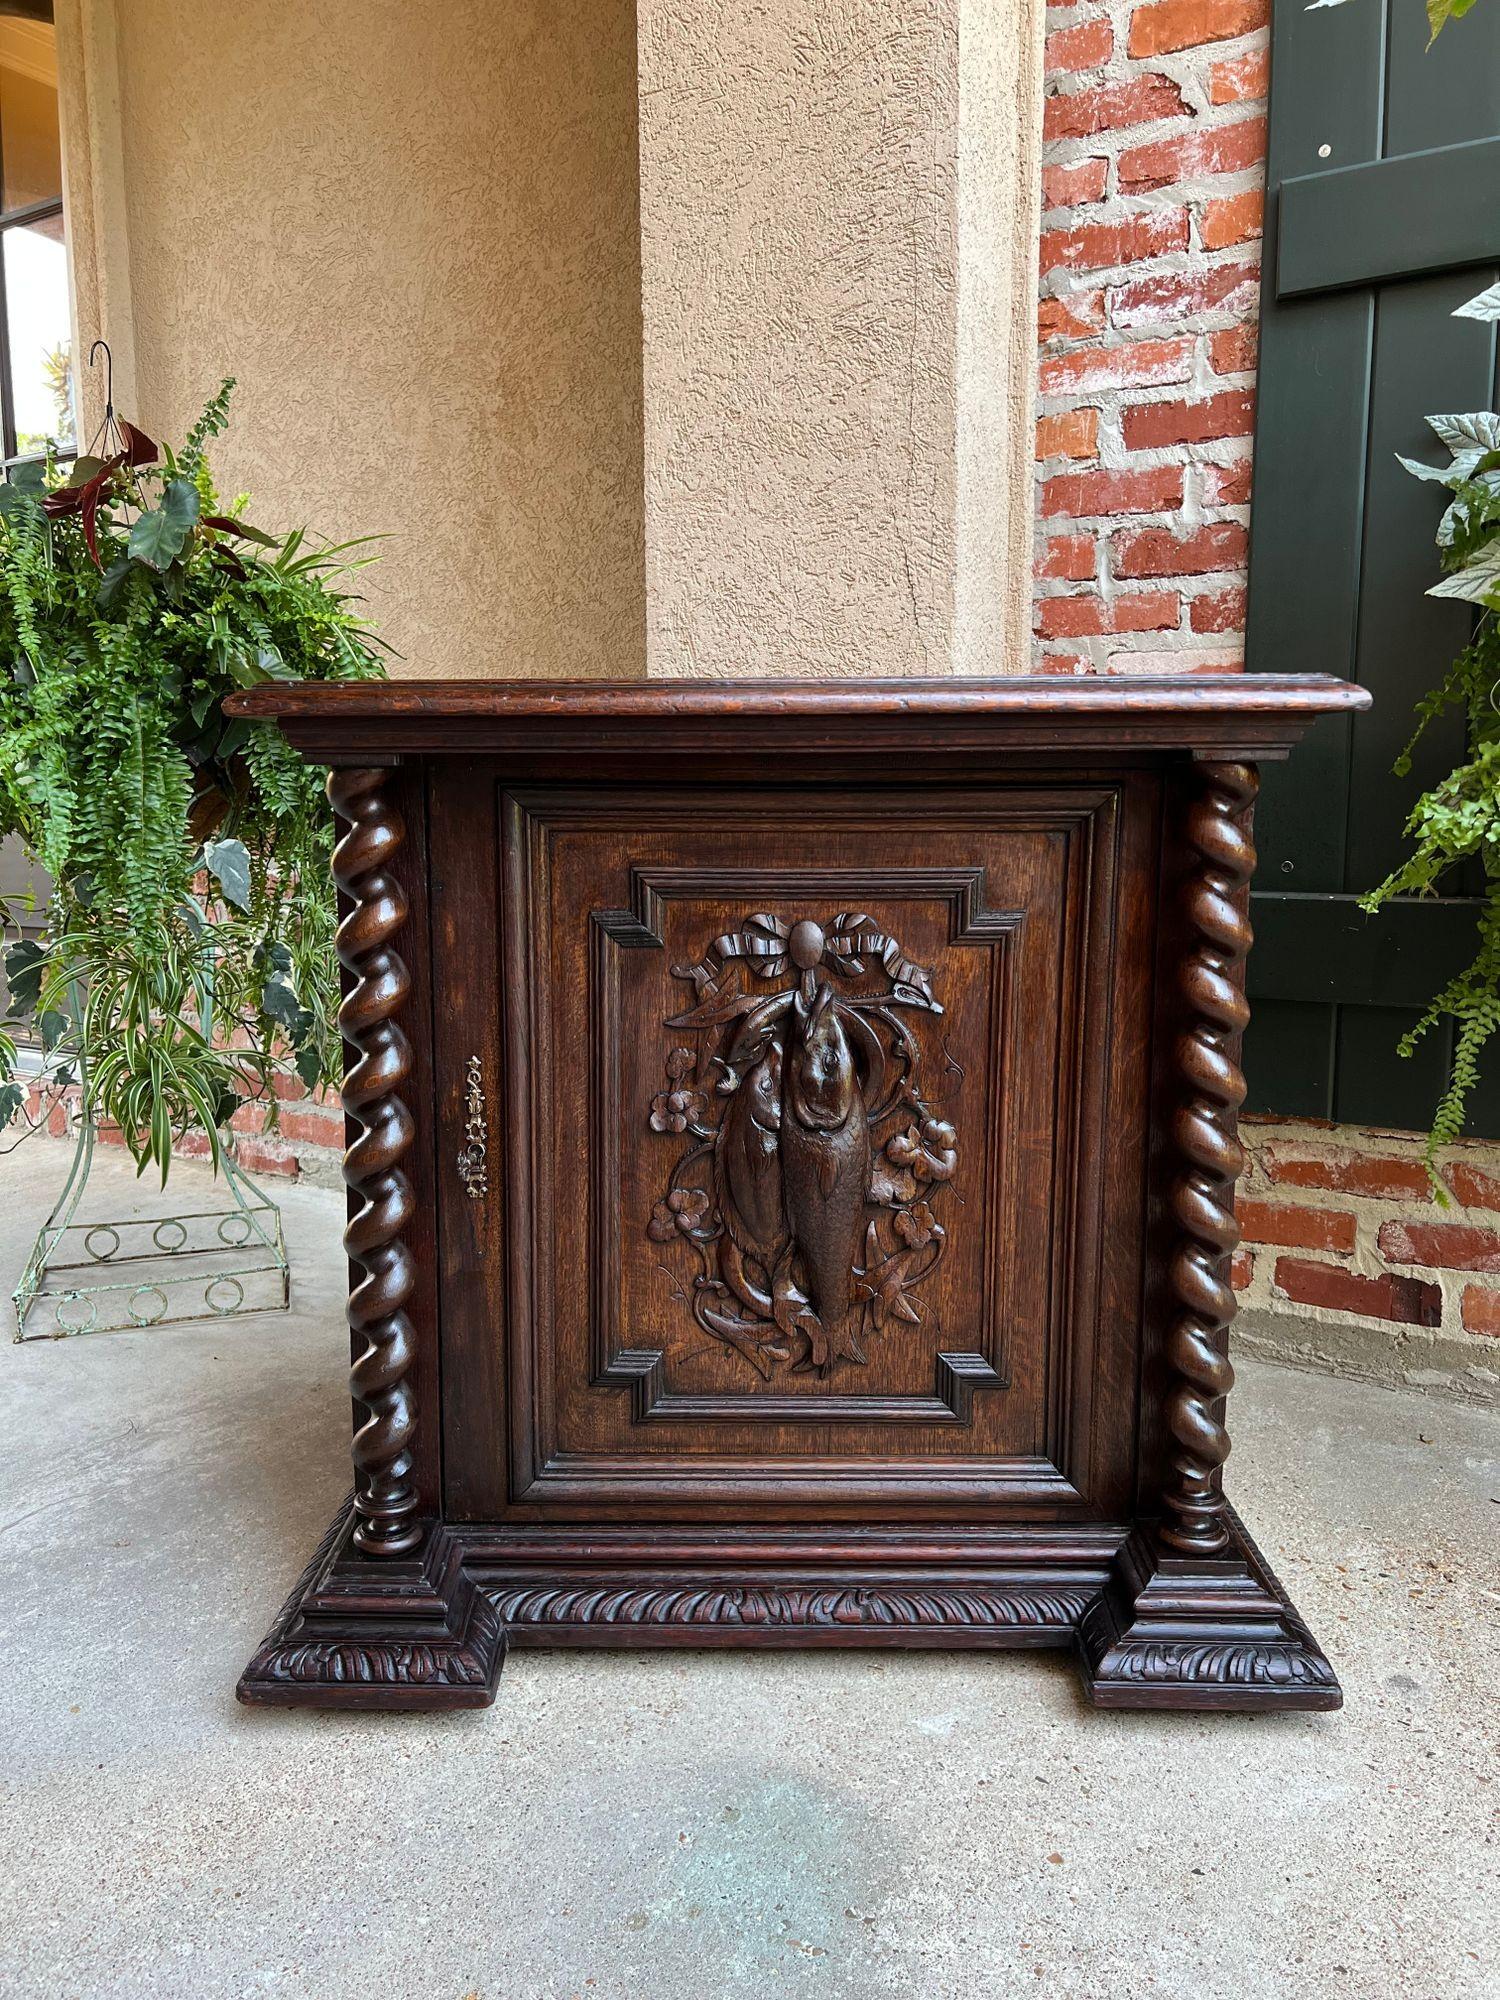 19th Century French hunt cabinet barley twist black forest wine bar carved oak.
 
Directly imported from France, a beautifully hand carved 19th century French confiturier cabinet.
These cabinets are one of our most requested antiques, as they have